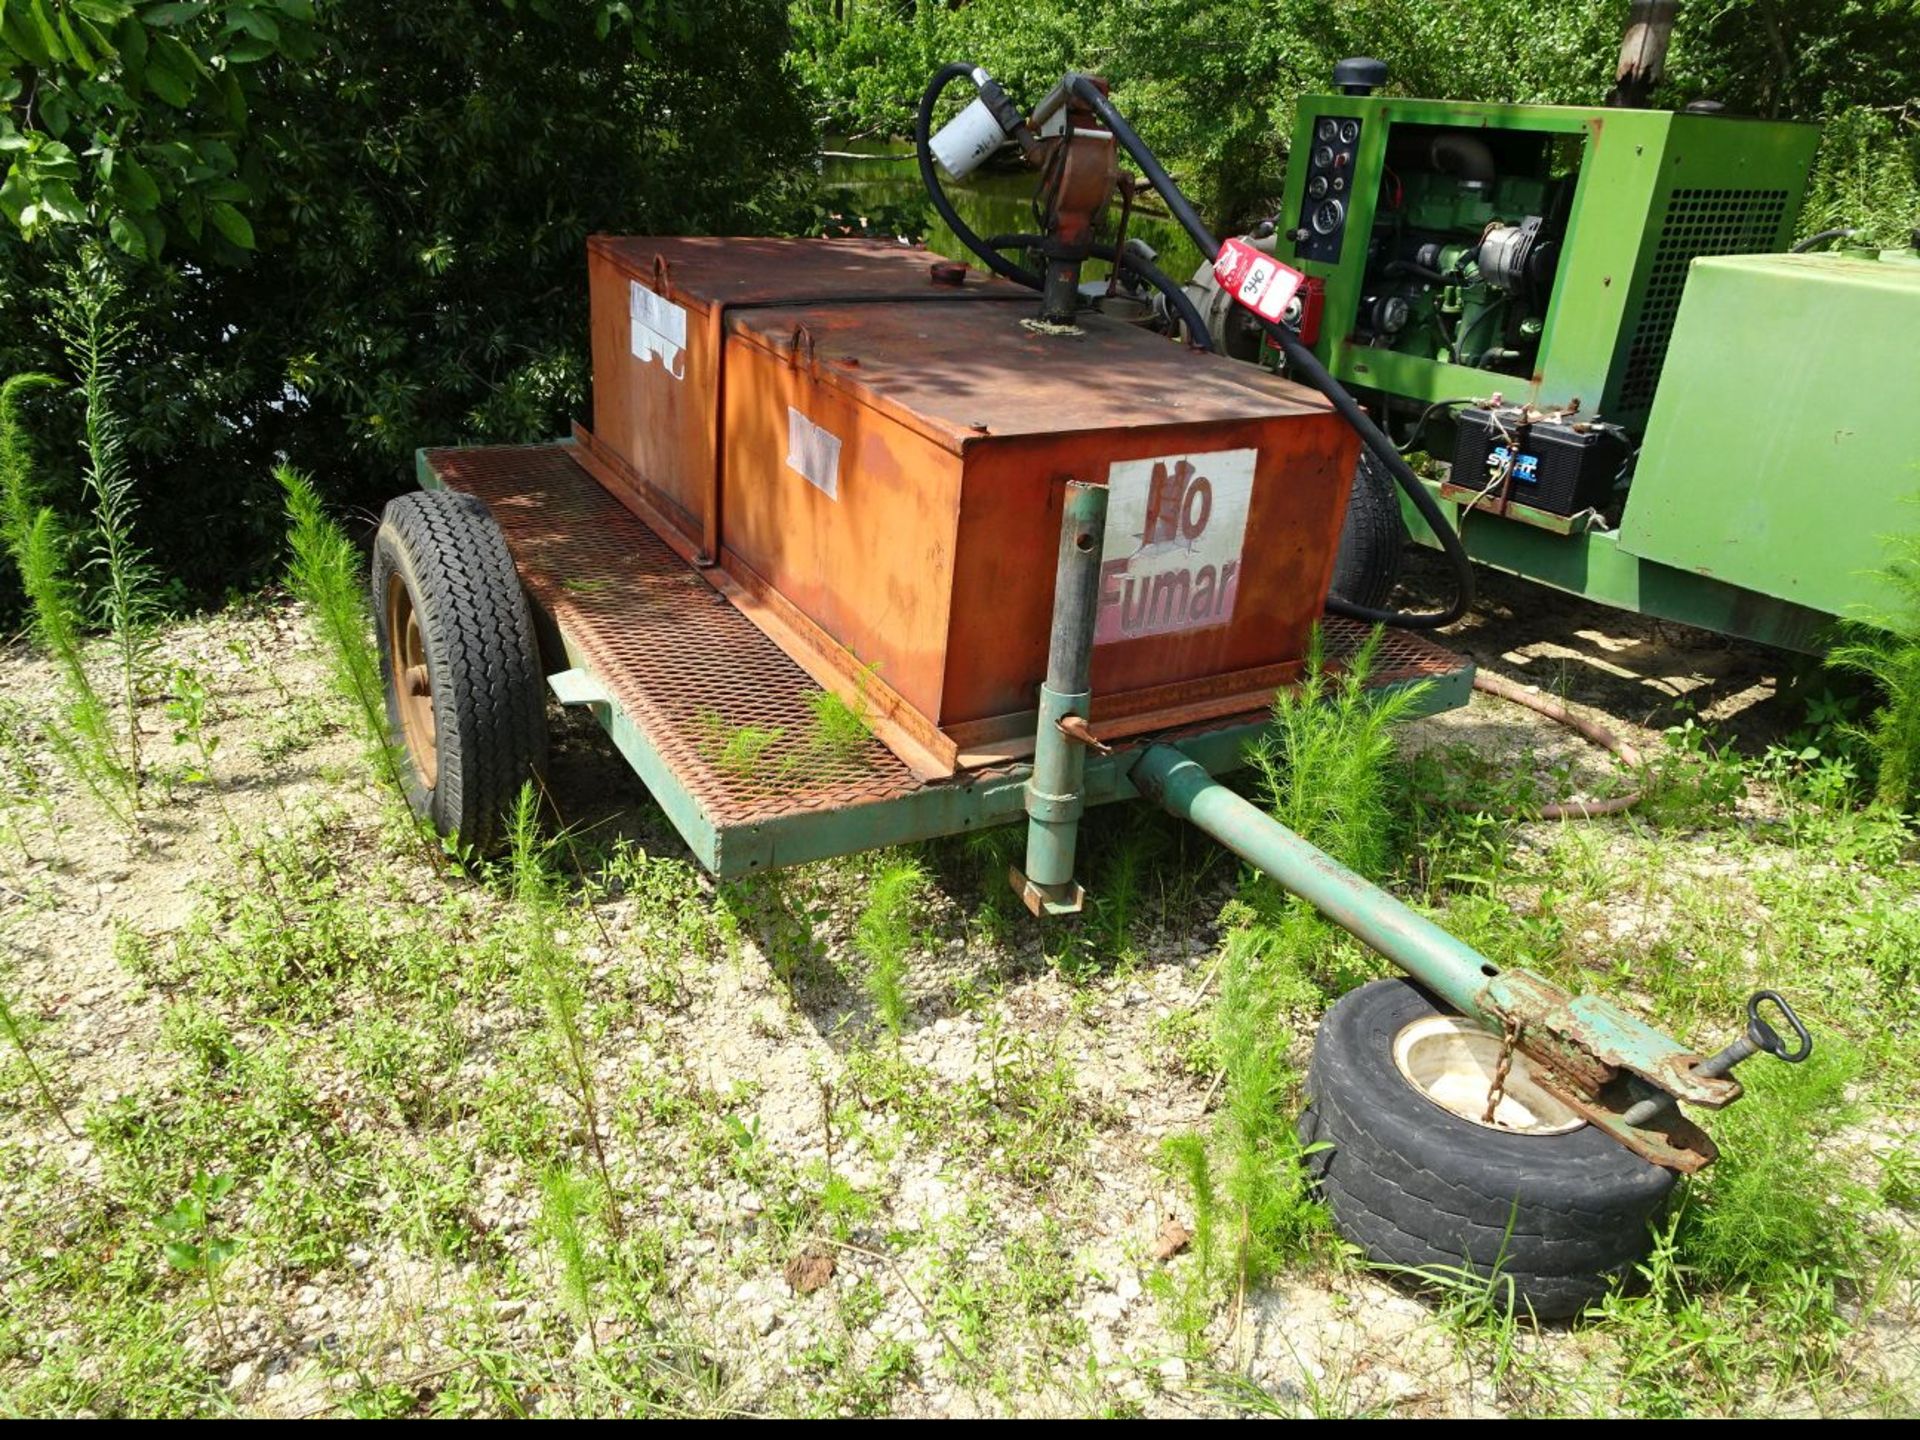 TOWABLE FUEL TRAILER, APPROX 150 GALLON, PIN STYLE HITCH, SINGLE AXLE, WITH MANUAL PUMP (LOCATION: